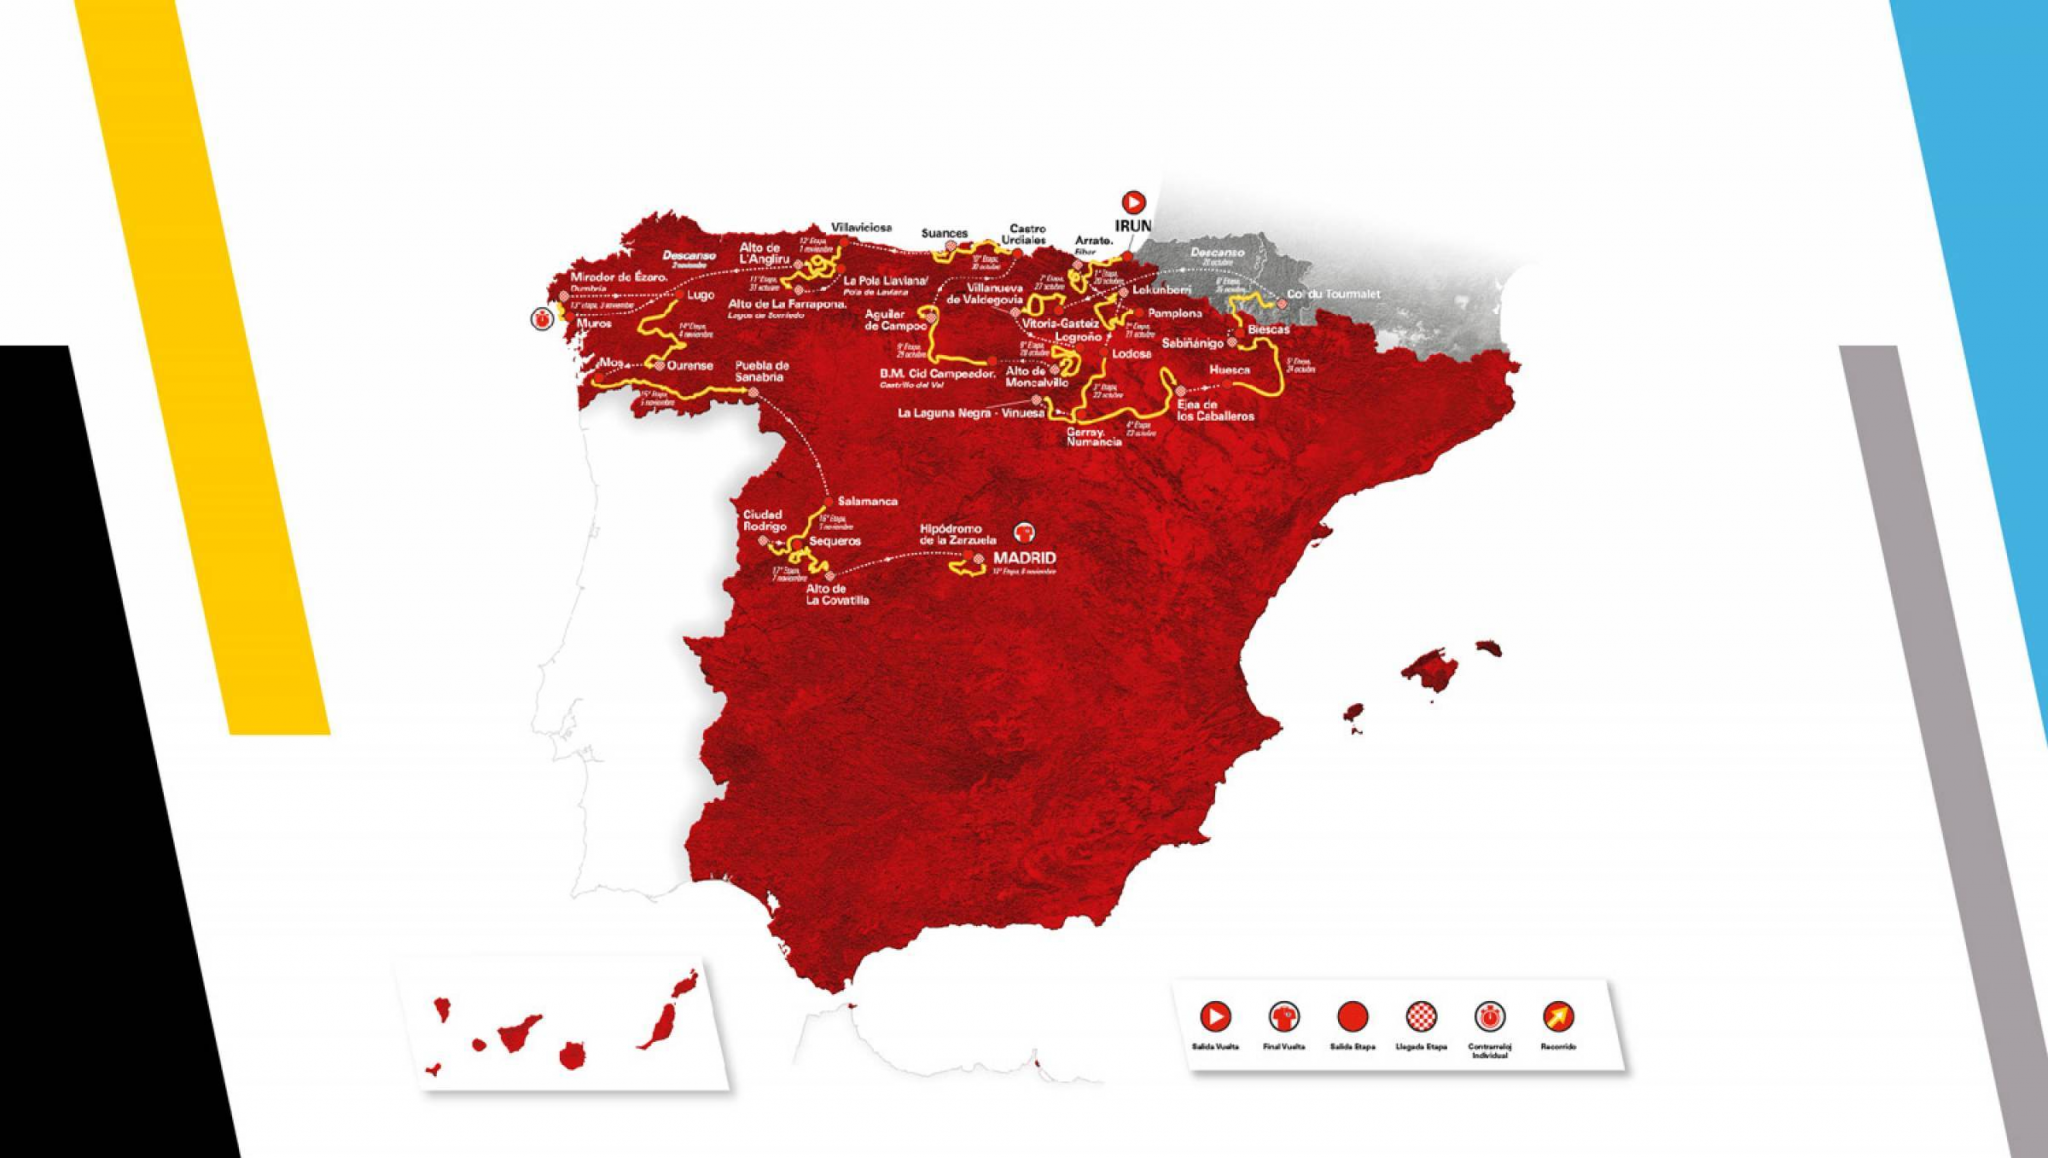 Organsiers have revealed details of the modified stages 15 and 16 ©Vuelta a Espana